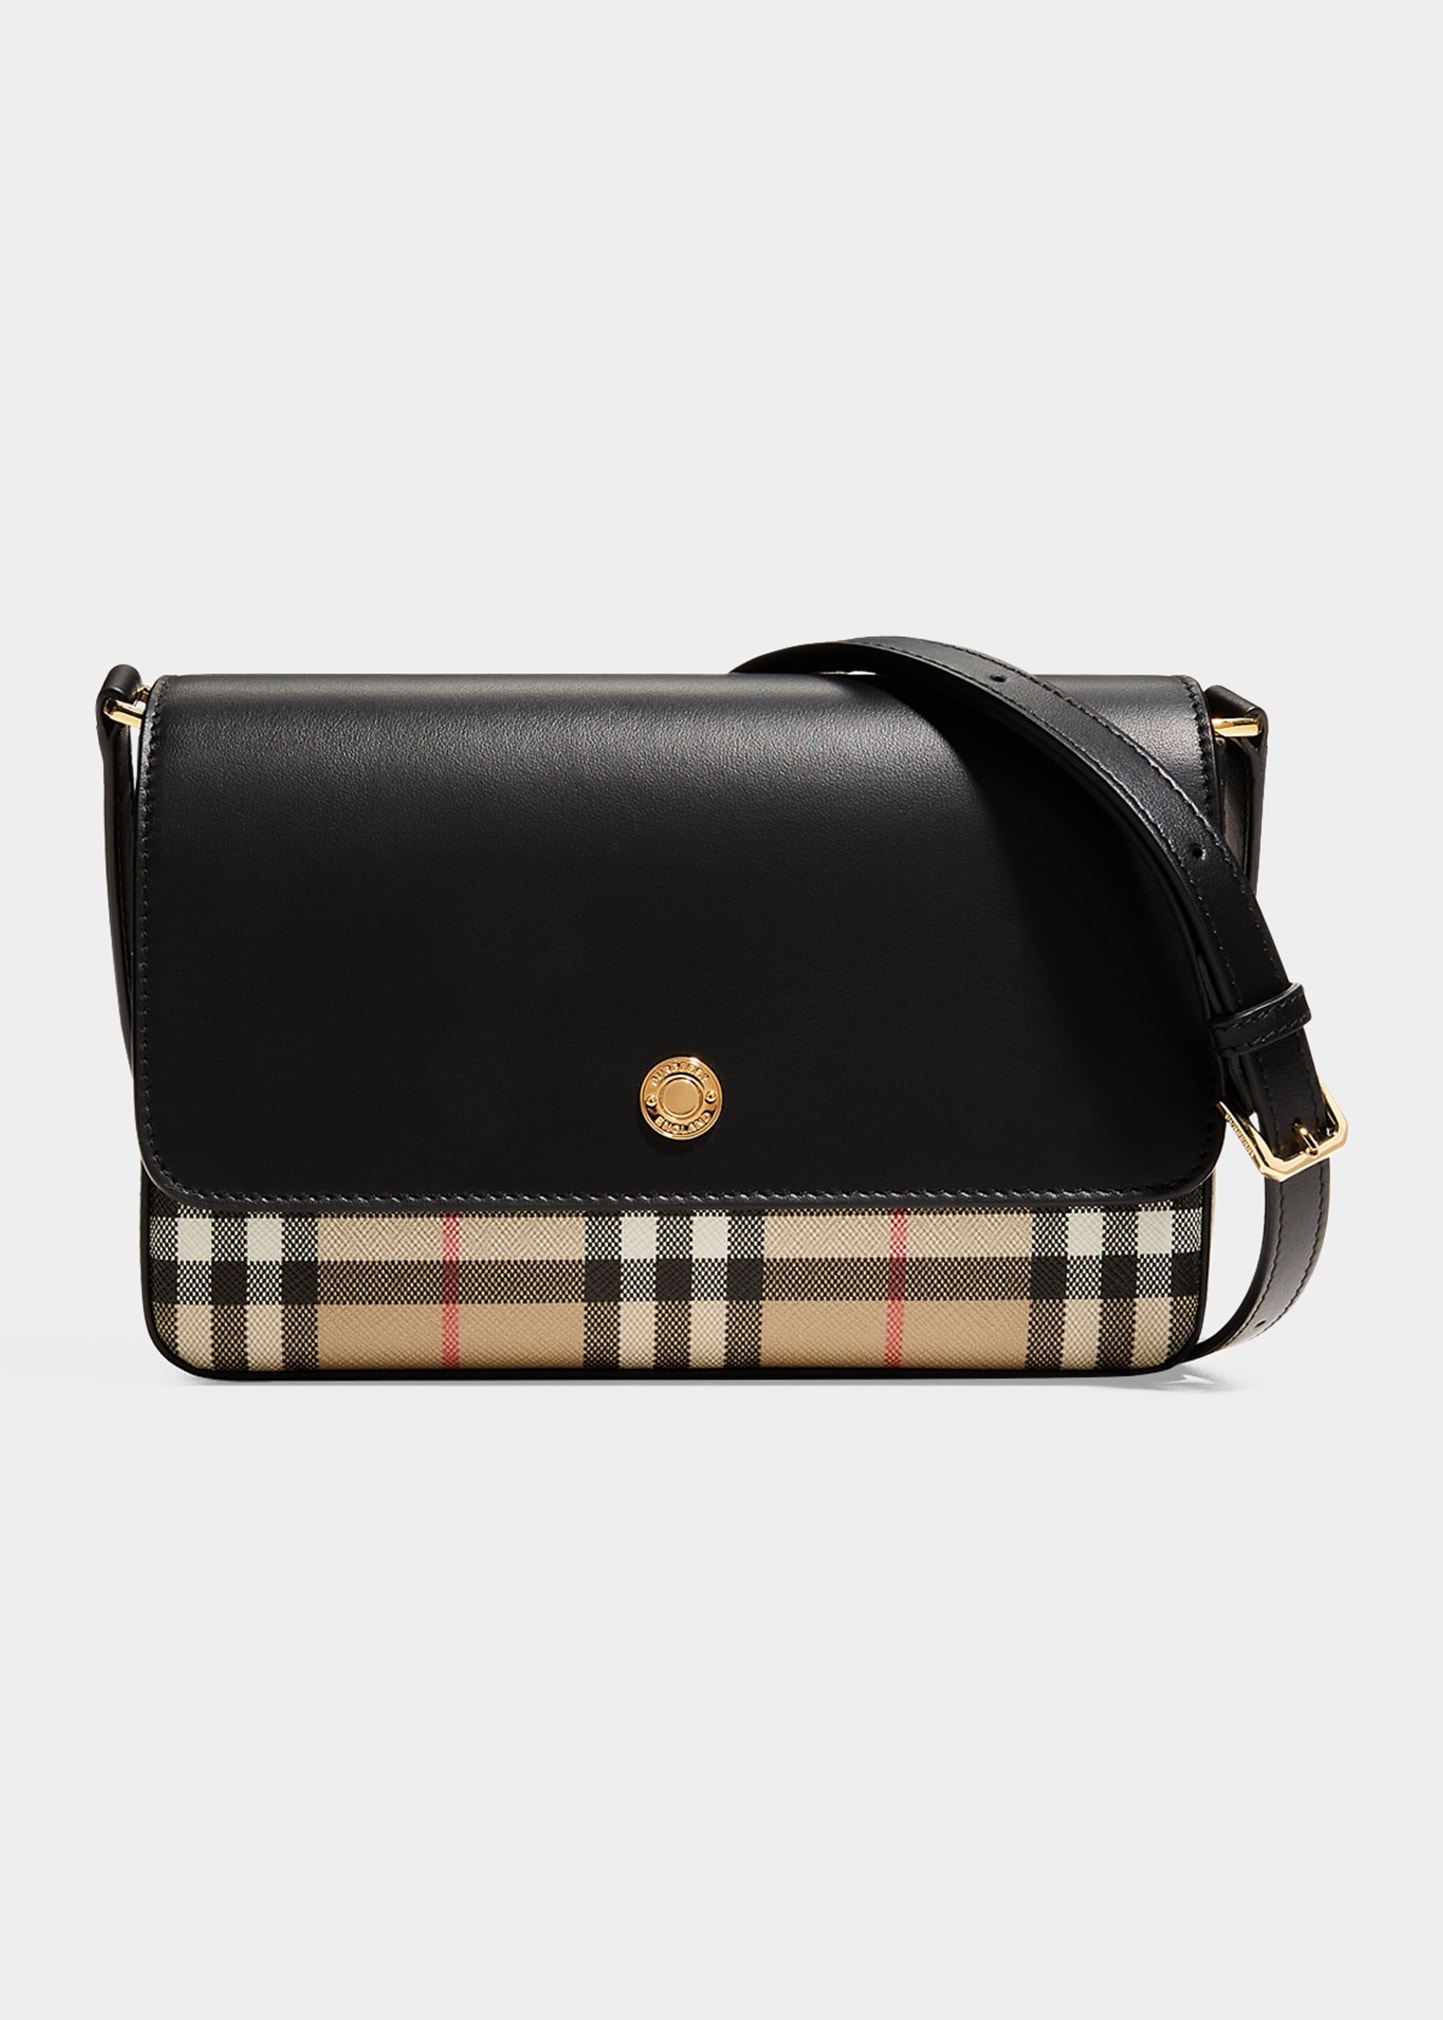 Burberry New Hampshire Vintage Check Canvas & Leather Crossbody Bag